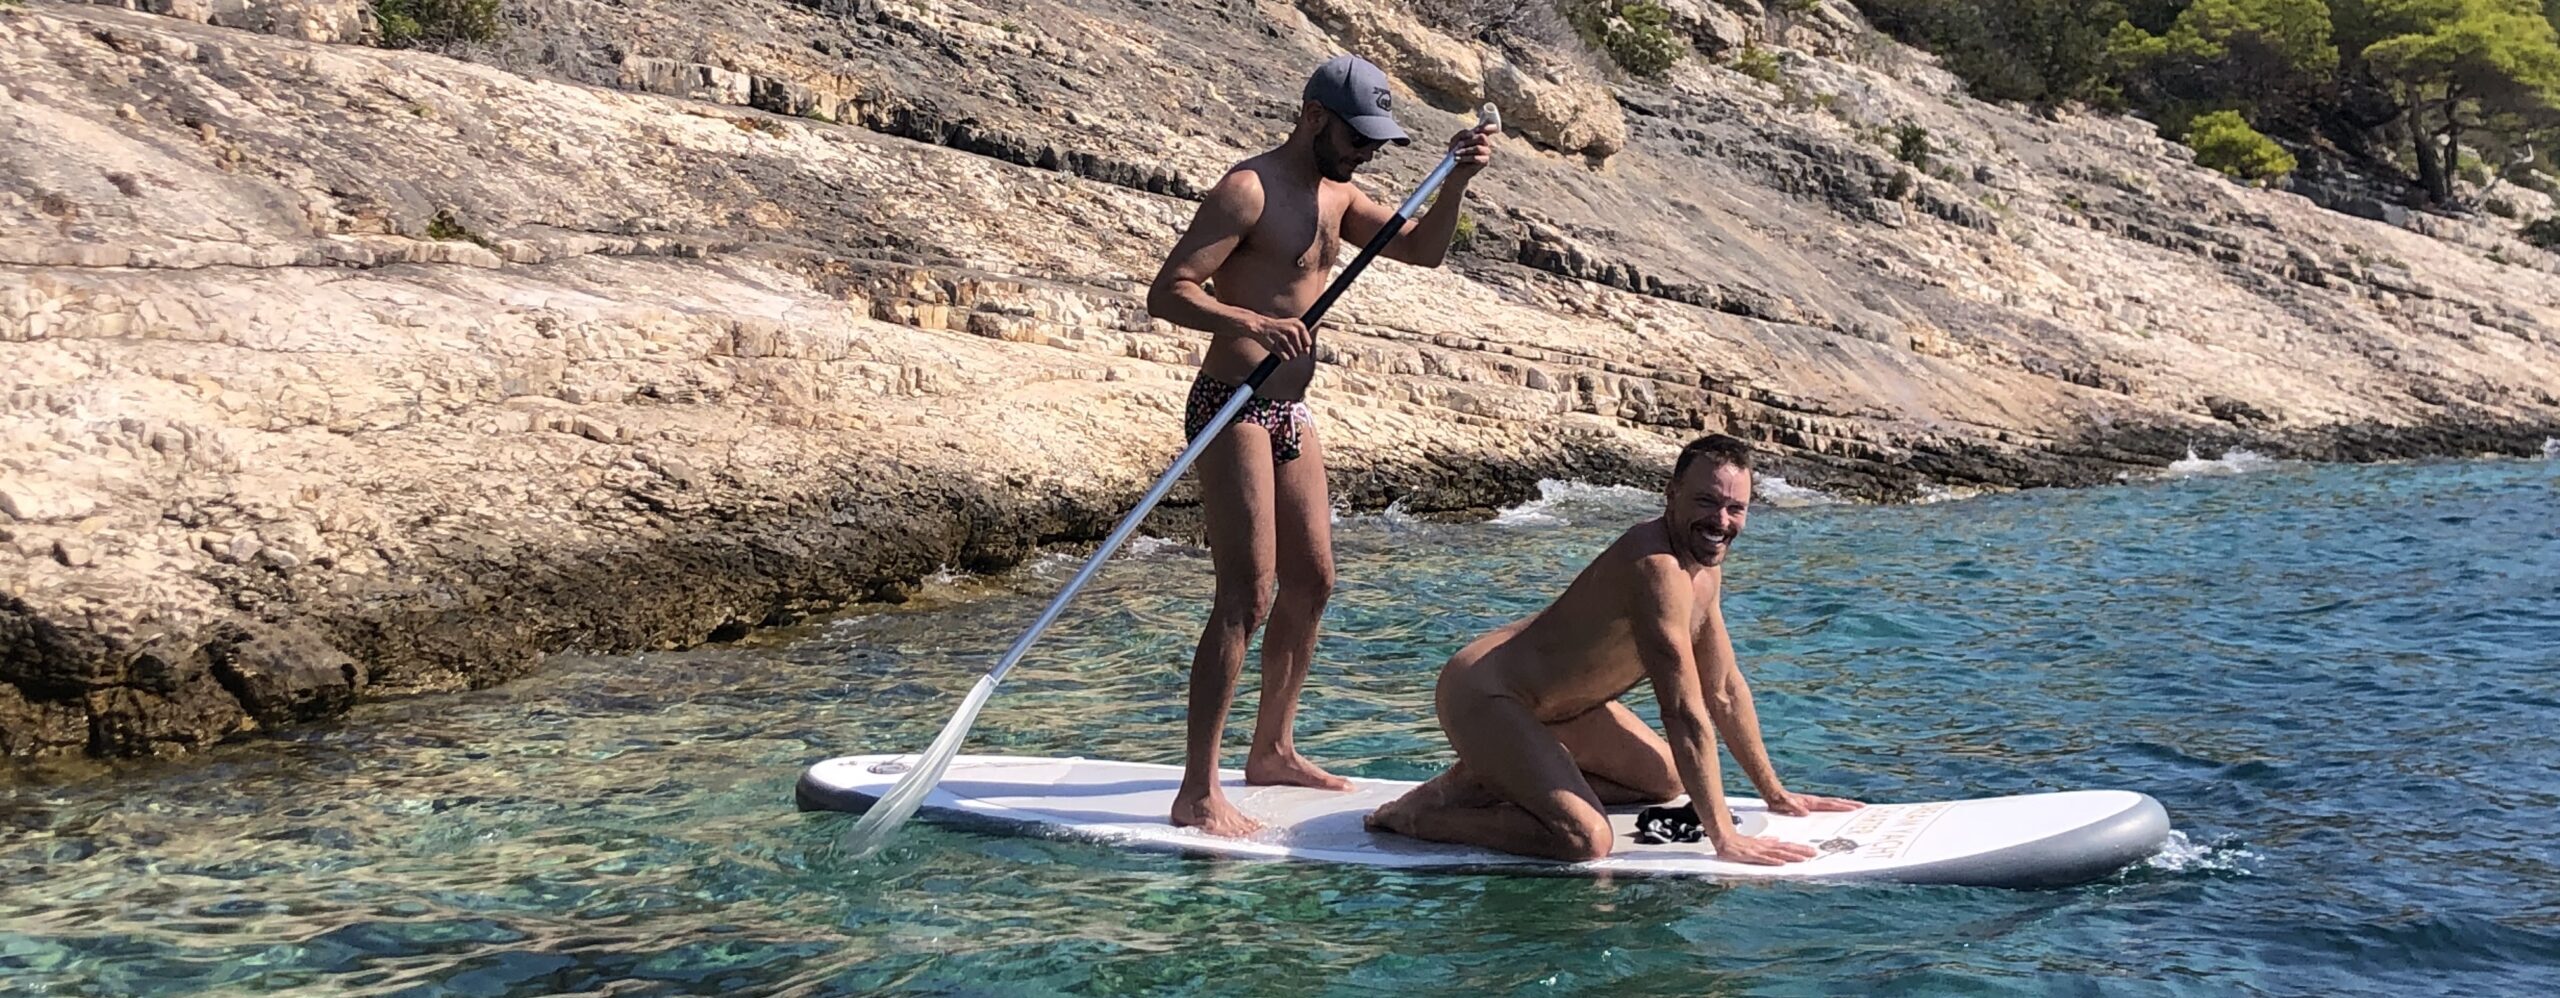 Naked and in speedo peddle board SUP 2 Saltyboys